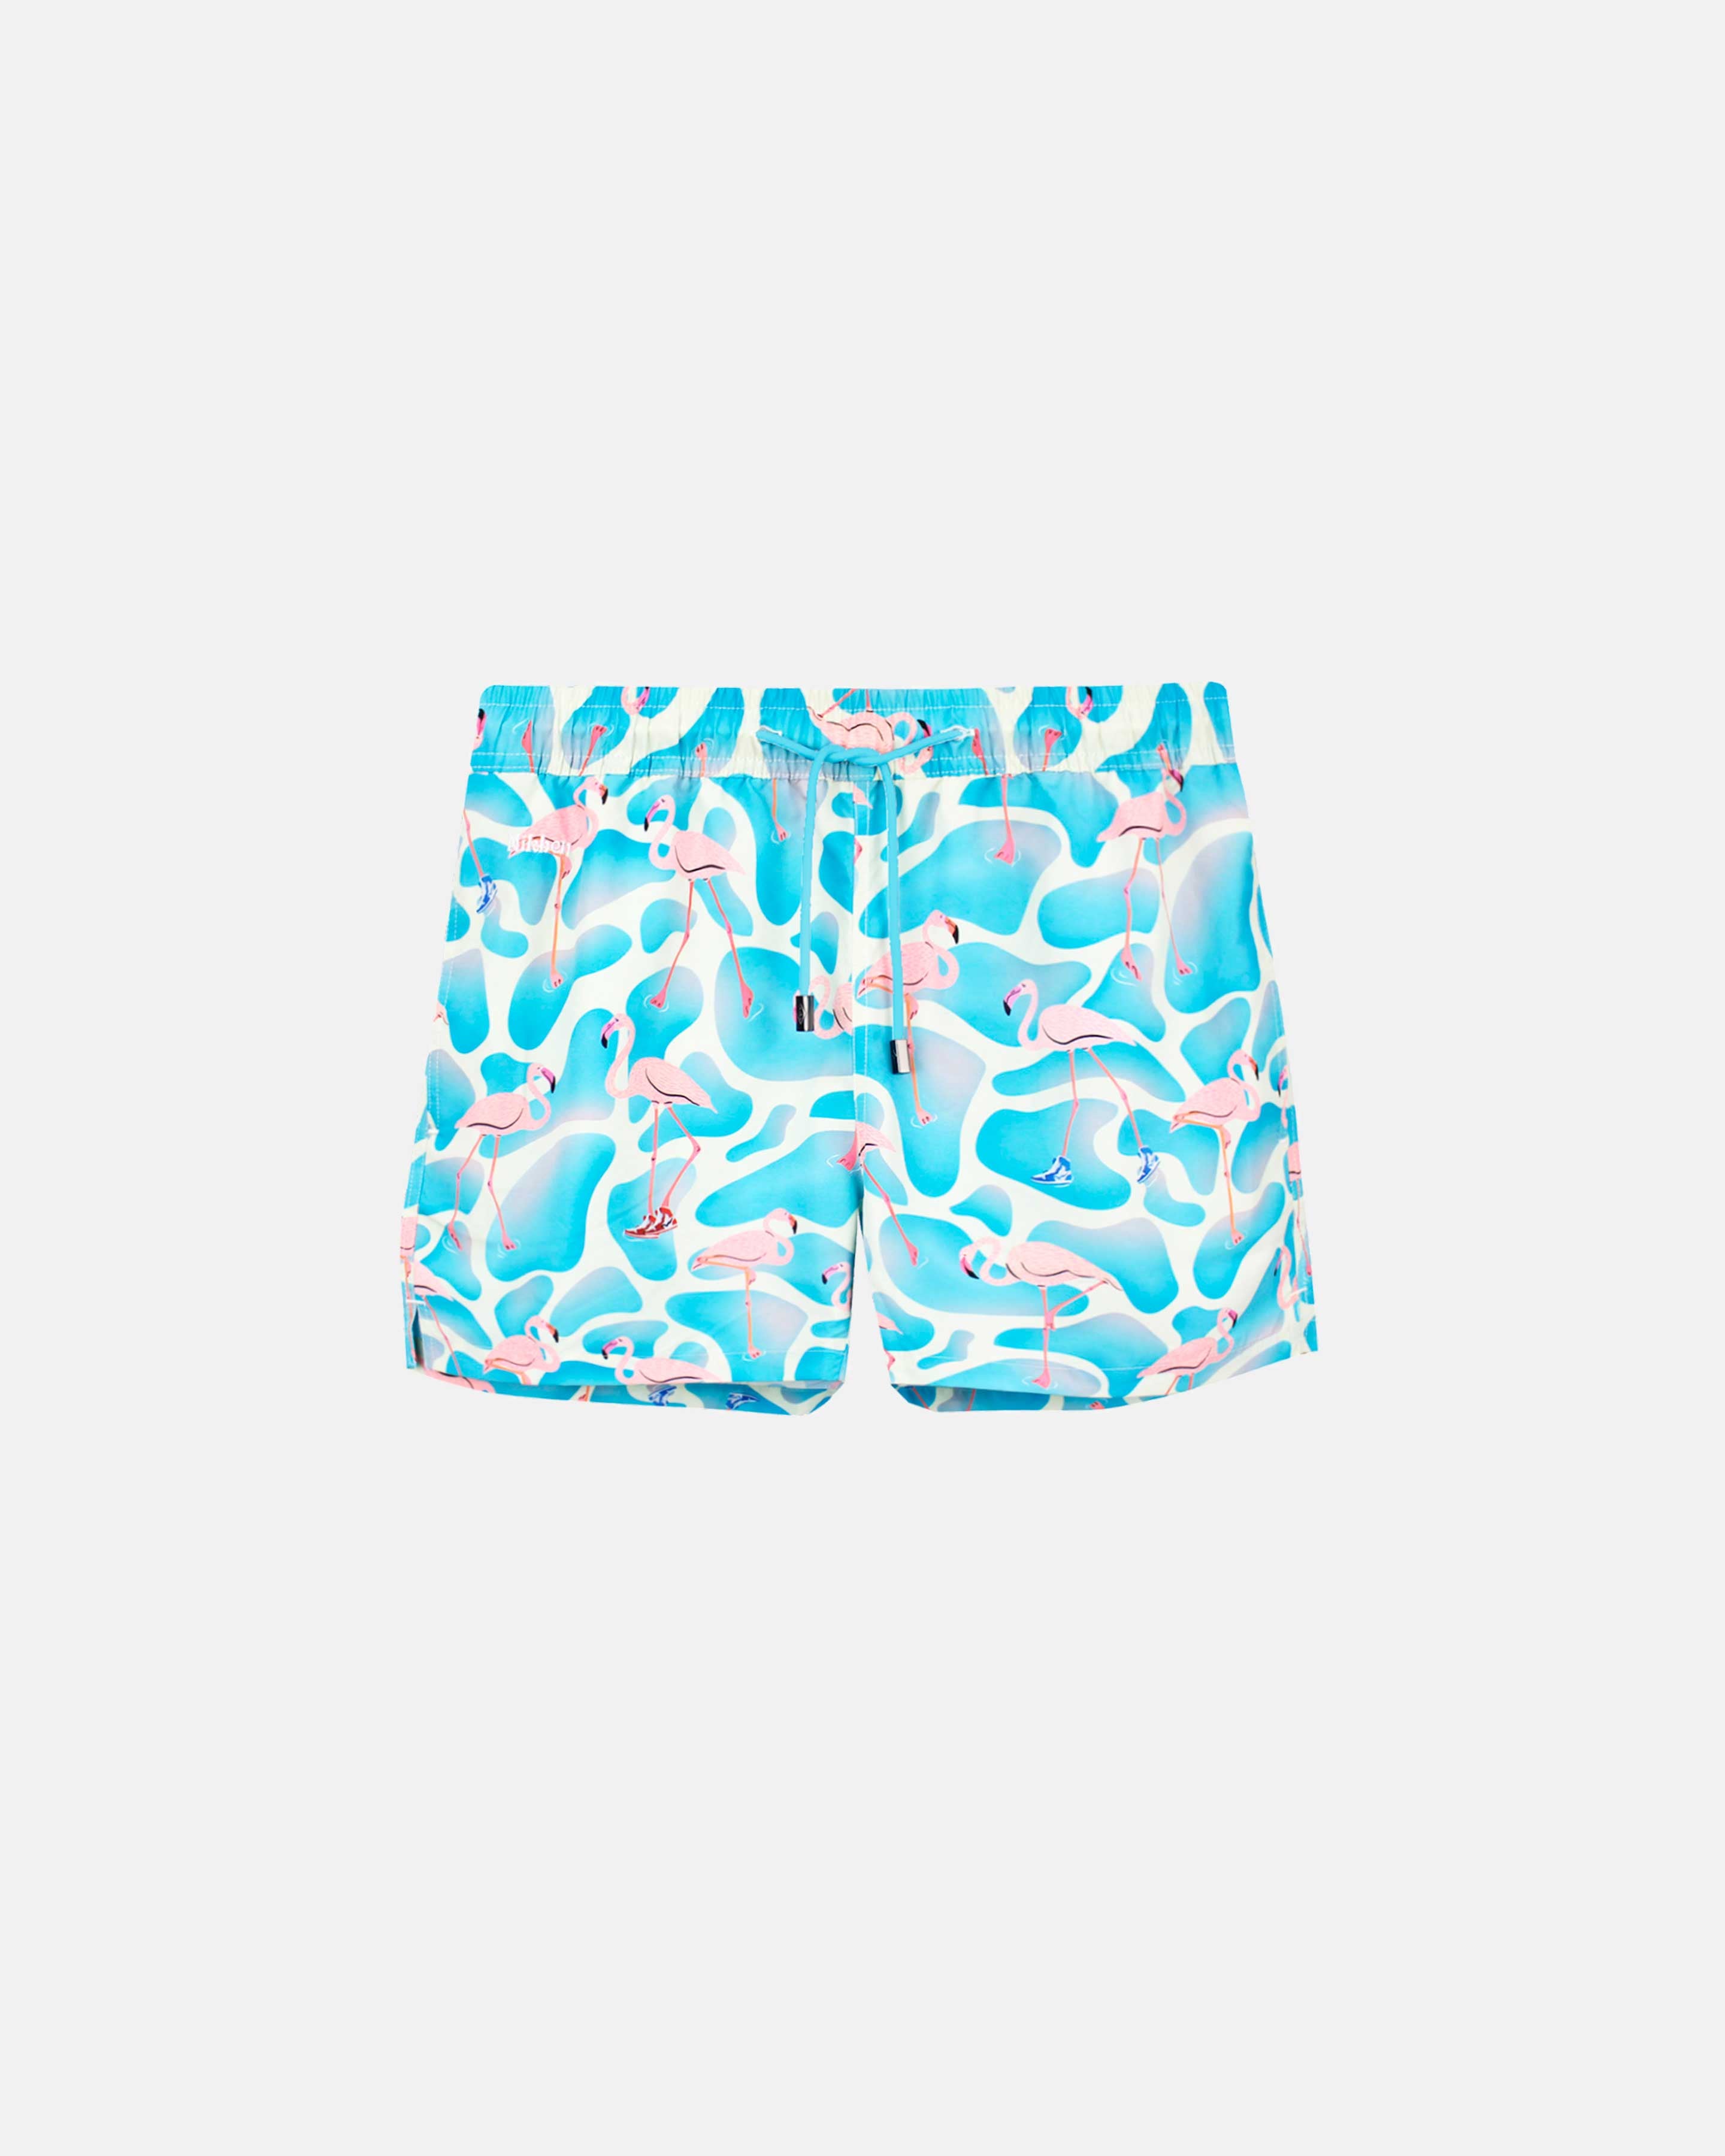 Blue mid length swim trunks with pink flamingos, logo and drawstring